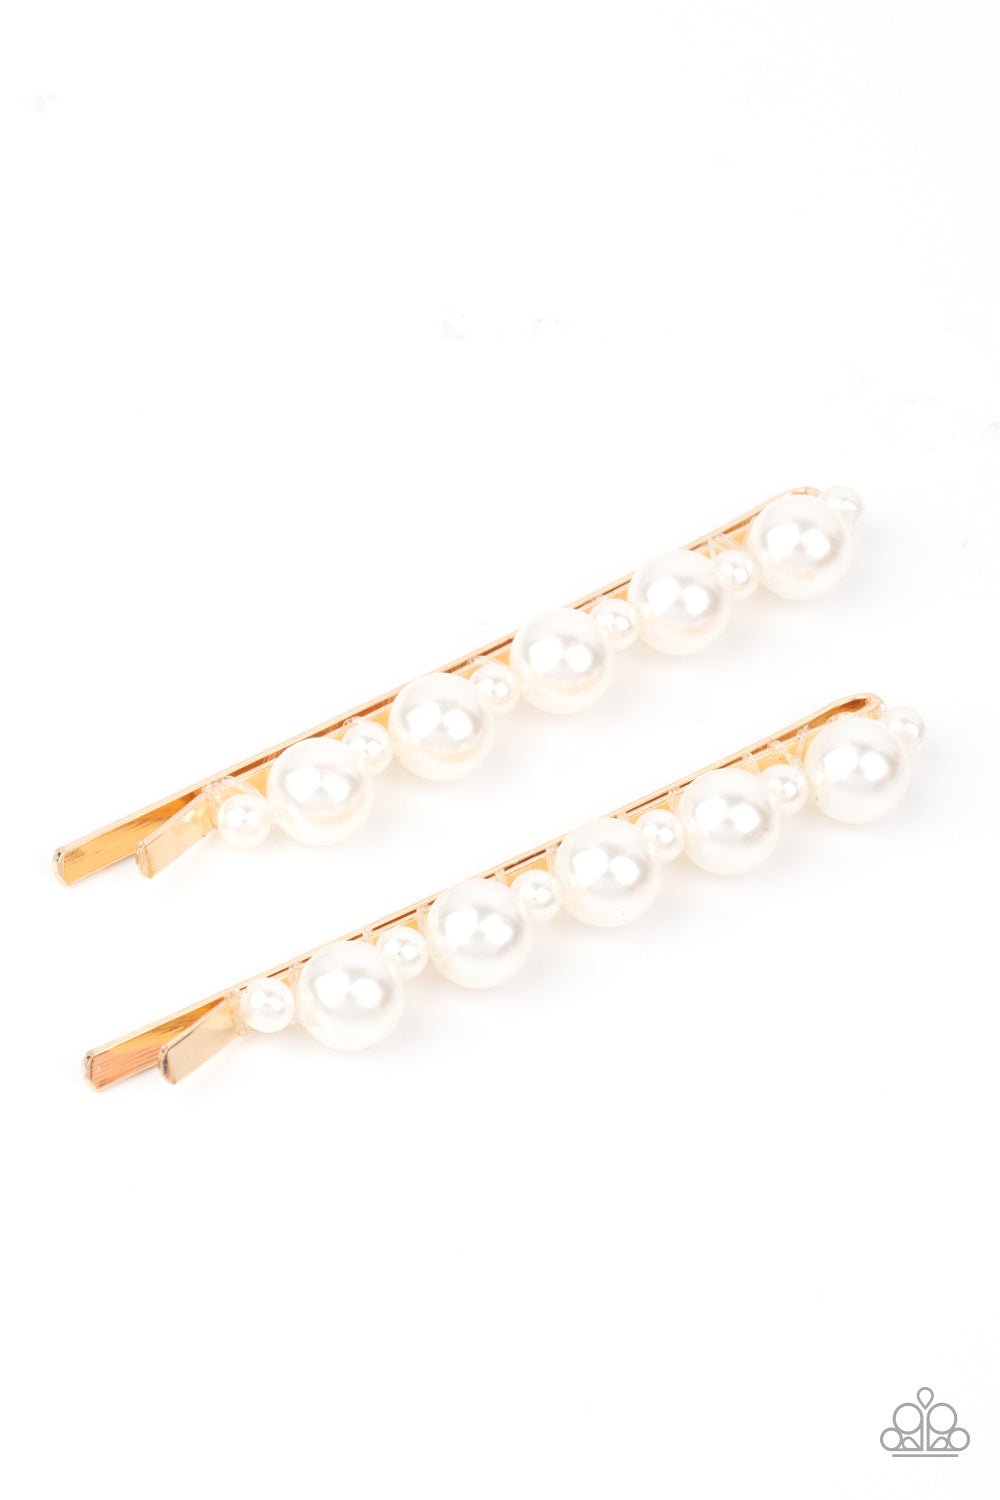 Put A Pin In It Gold Hair Clip - Paparazzi Accessories  Dainty and classic pearls alternate along a pair of gold bobby pins, creating a bubbly display.  Sold as one pair of decorative bobby pins.